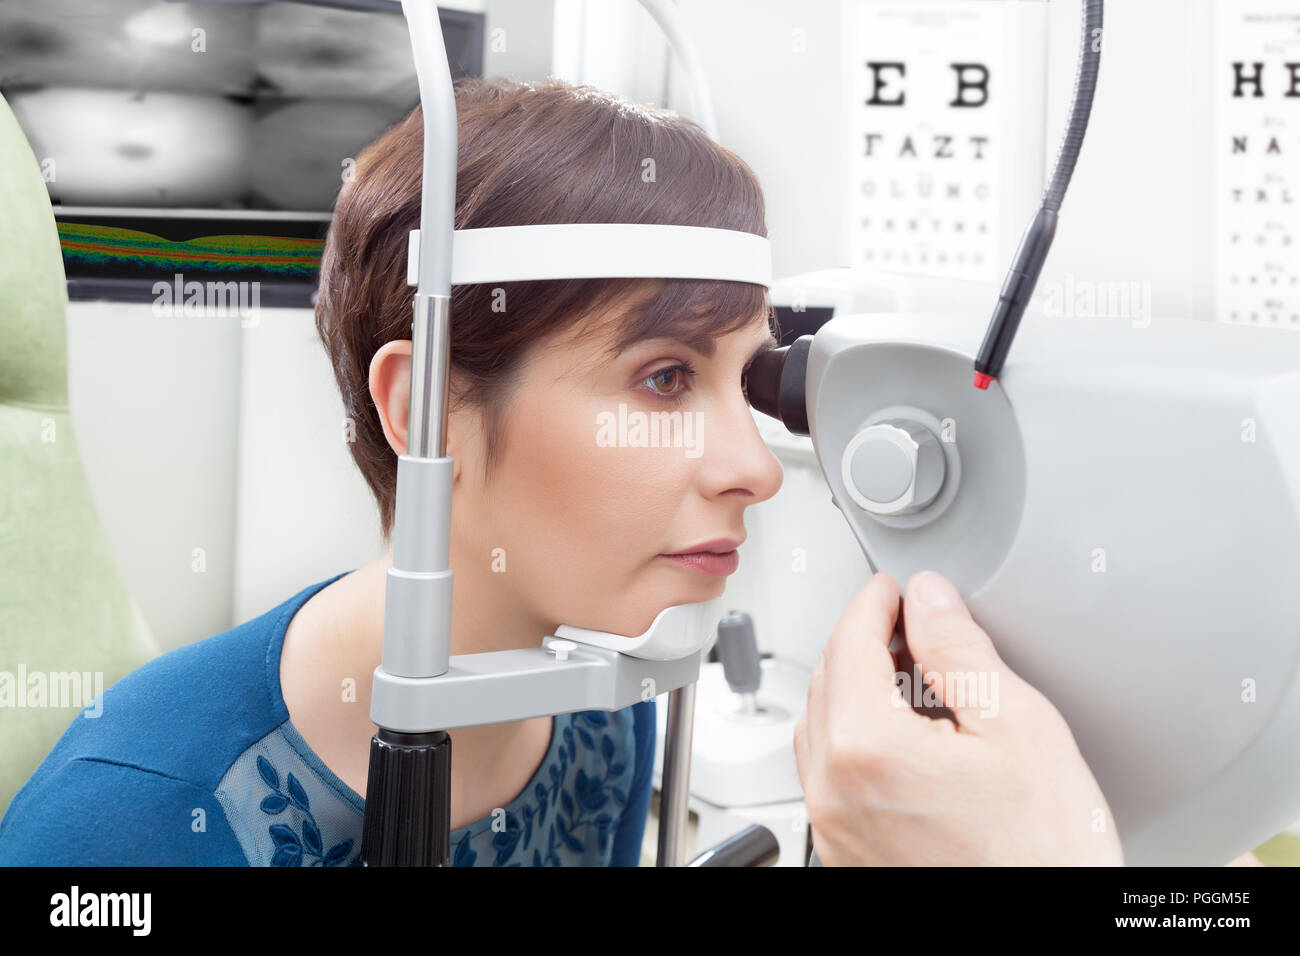 Woman with short haircut close-up from her side having eye examination at ophthalmology room in hospital, male oculist hand adjusting the device in fo Stock Photo